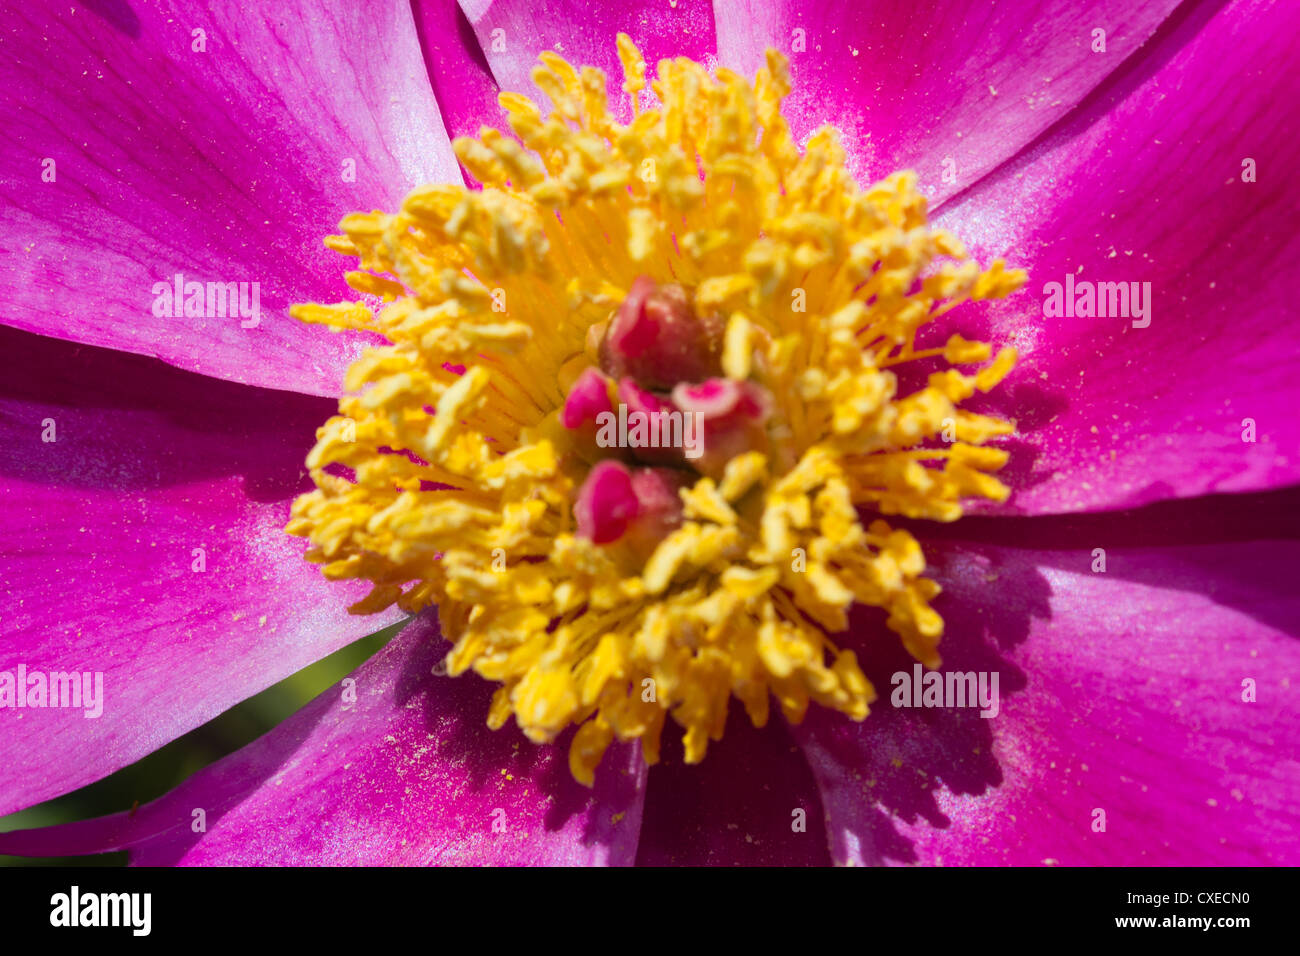 Close-up of an Imperial Red Flower (paeonia lactiflora) dans un jardin. Banque D'Images